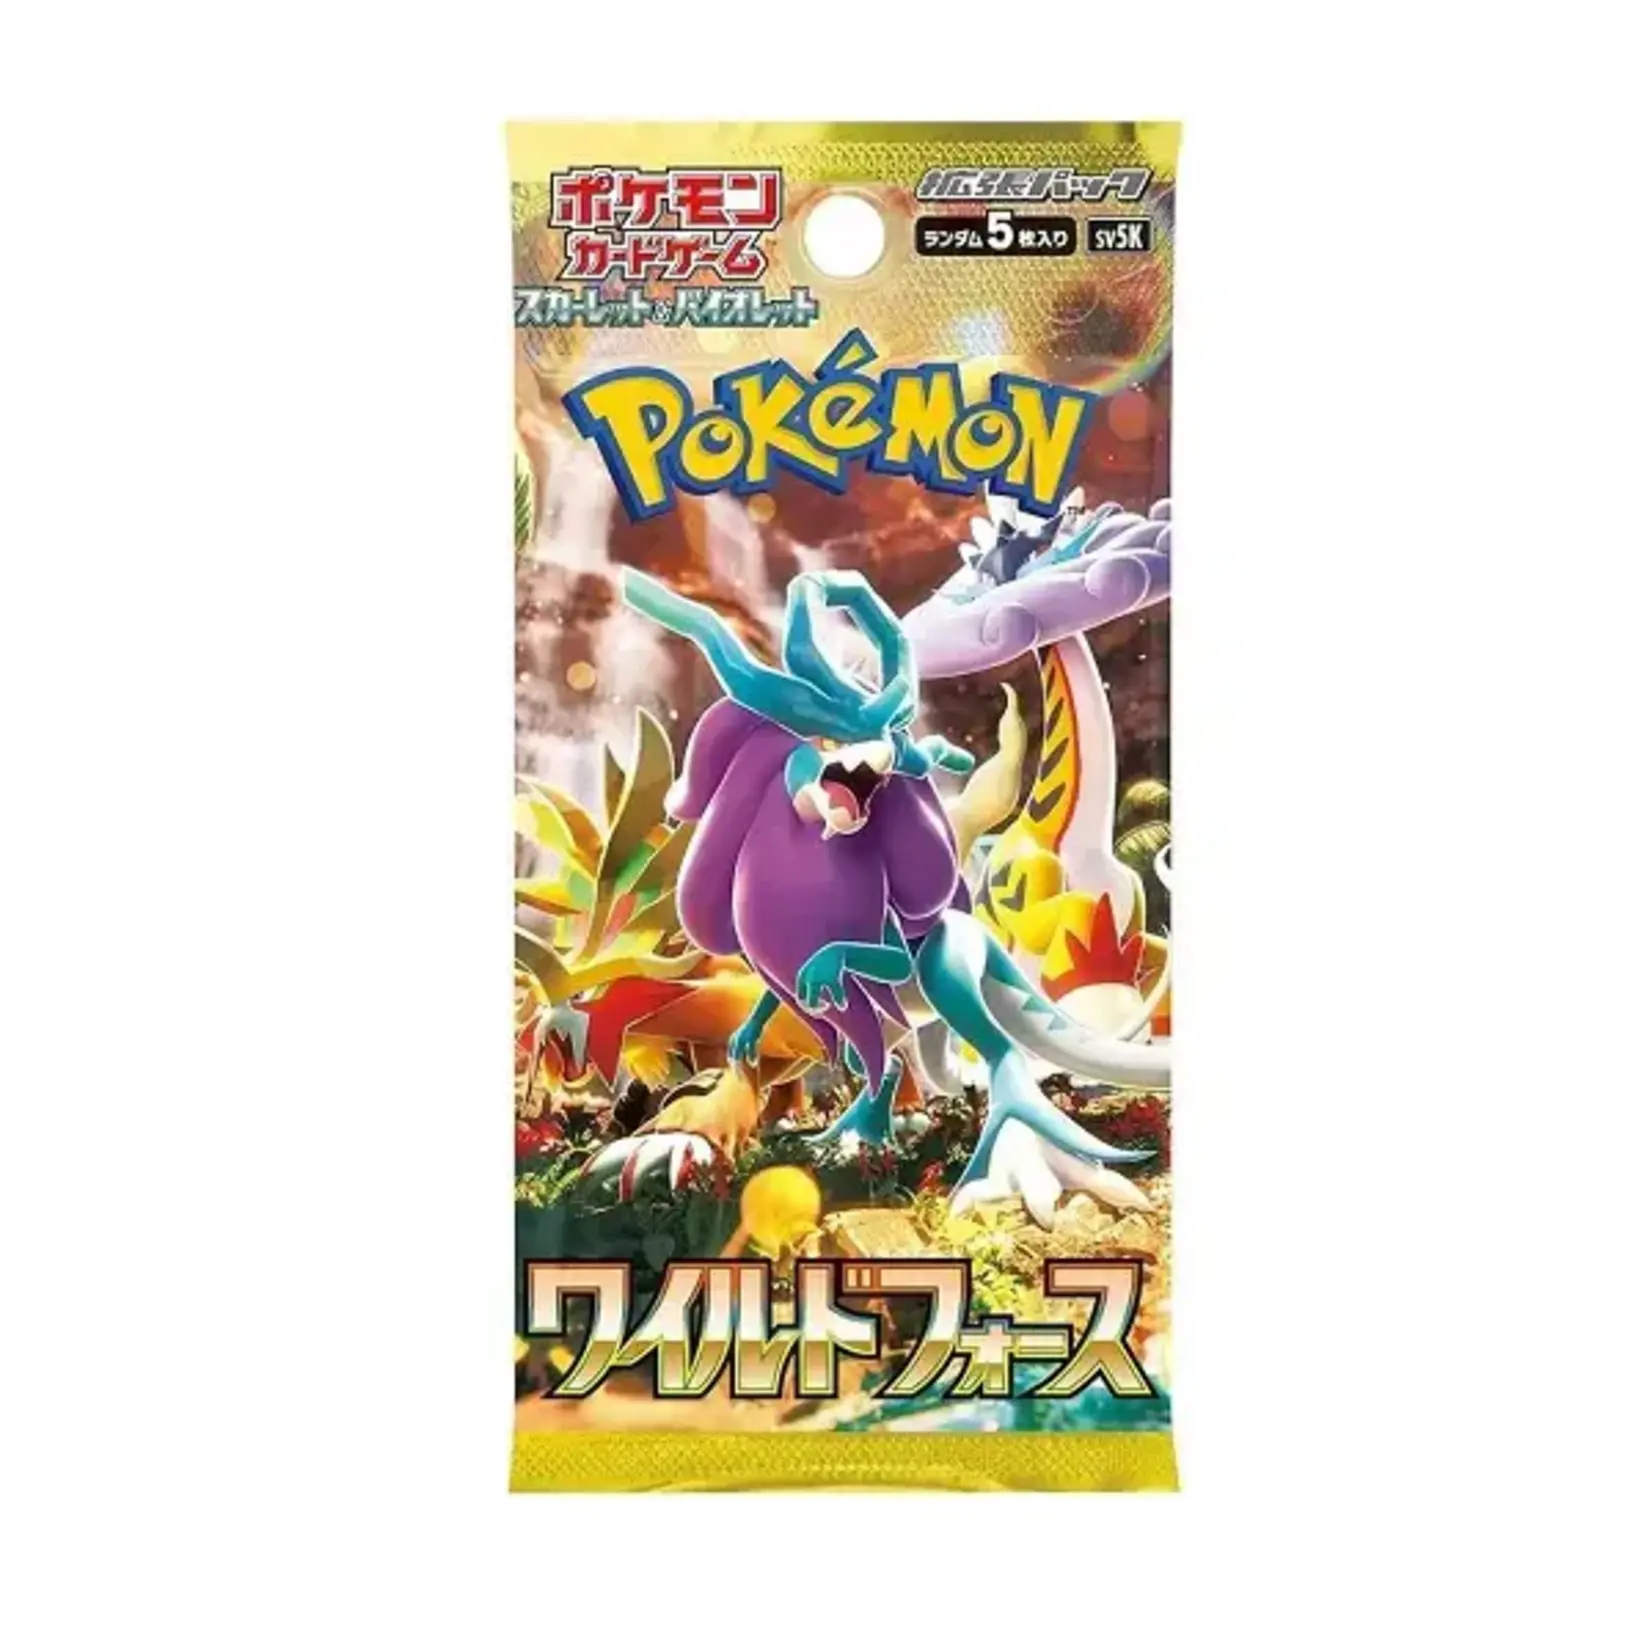 Pokémon Wild Force Booster Pack